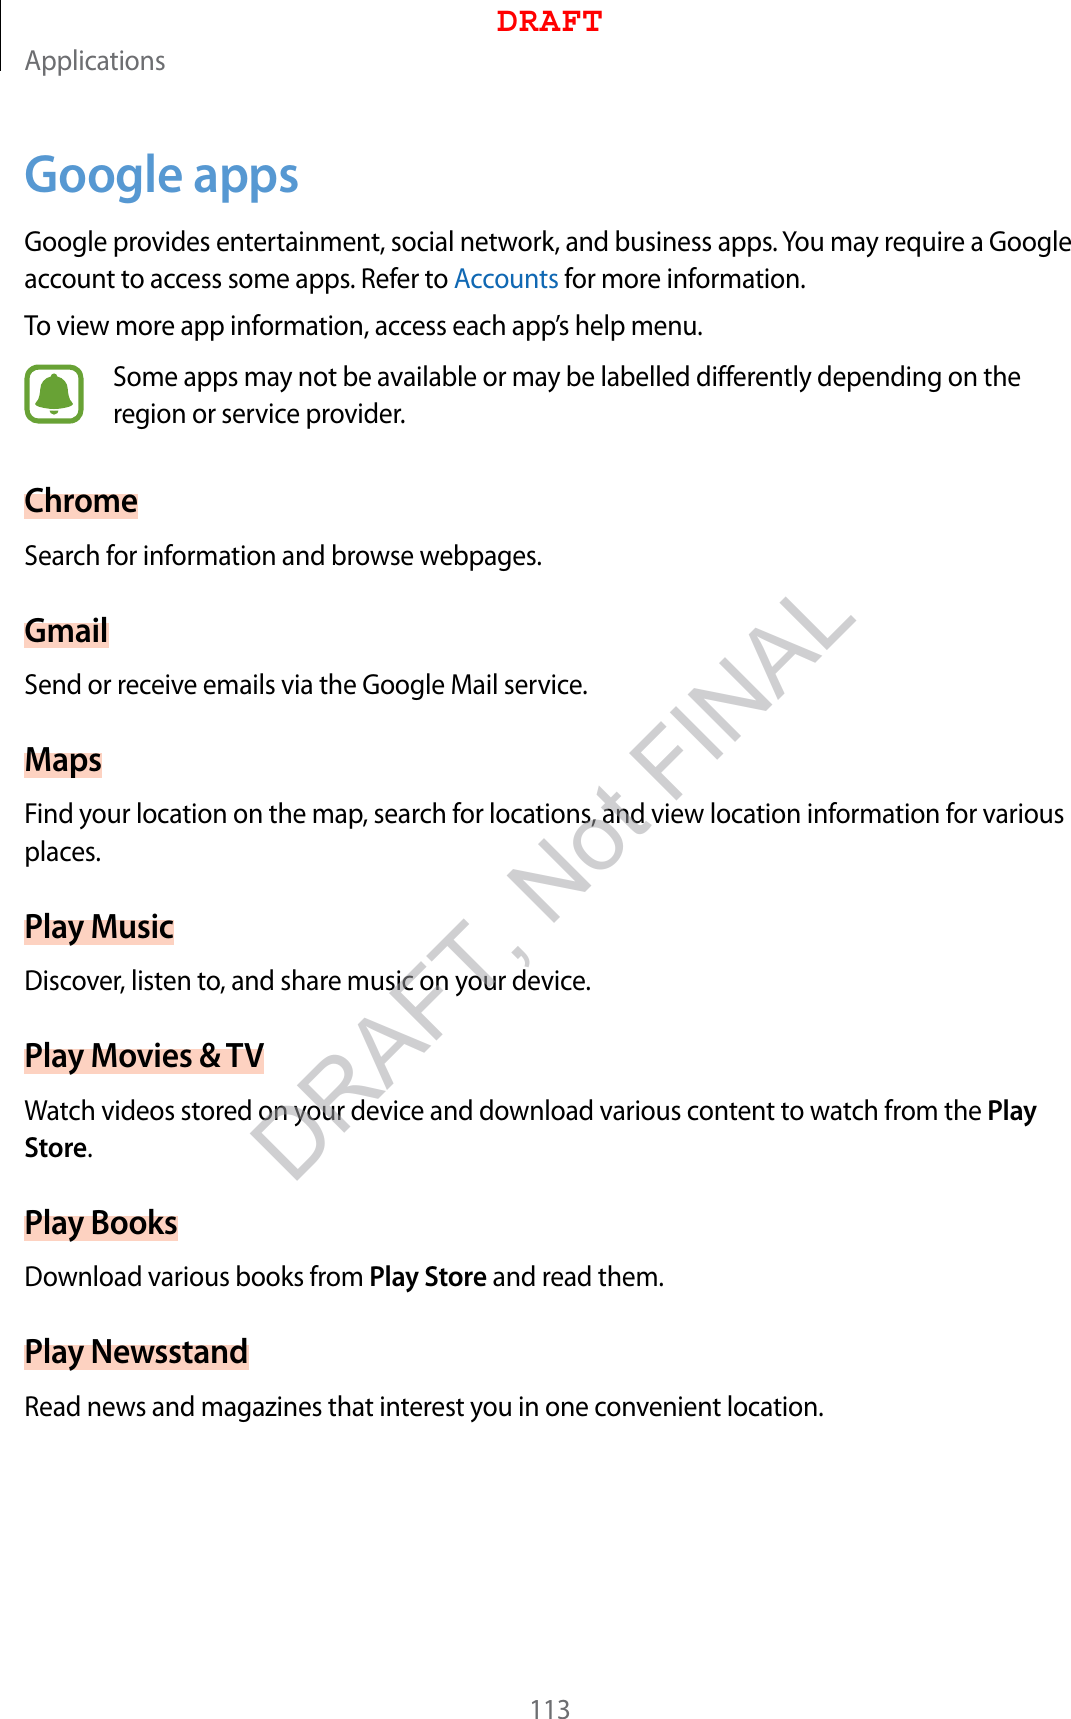 Applications113Google appsGoogle provides entertainment, social network, and business apps. You may require a Google account to access some apps. Refer to Accounts for more information.To view more app information, access each app’s help menu.Some apps may not be available or may be labelled differently depending on the region or service provider.ChromeSearch for information and browse webpages.GmailSend or receive emails via the Google Mail service.MapsFind your location on the map, search for locations, and view location information for various places.Play MusicDiscover, listen to, and share music on your device.Play Movies &amp; TVWatch videos stored on your device and download various content to watch from the Play Store.Play BooksDownload various books from Play Store and read them.Play NewsstandRead news and magazines that interest you in one convenient location.DRAFTDRAFT, Not FINAL